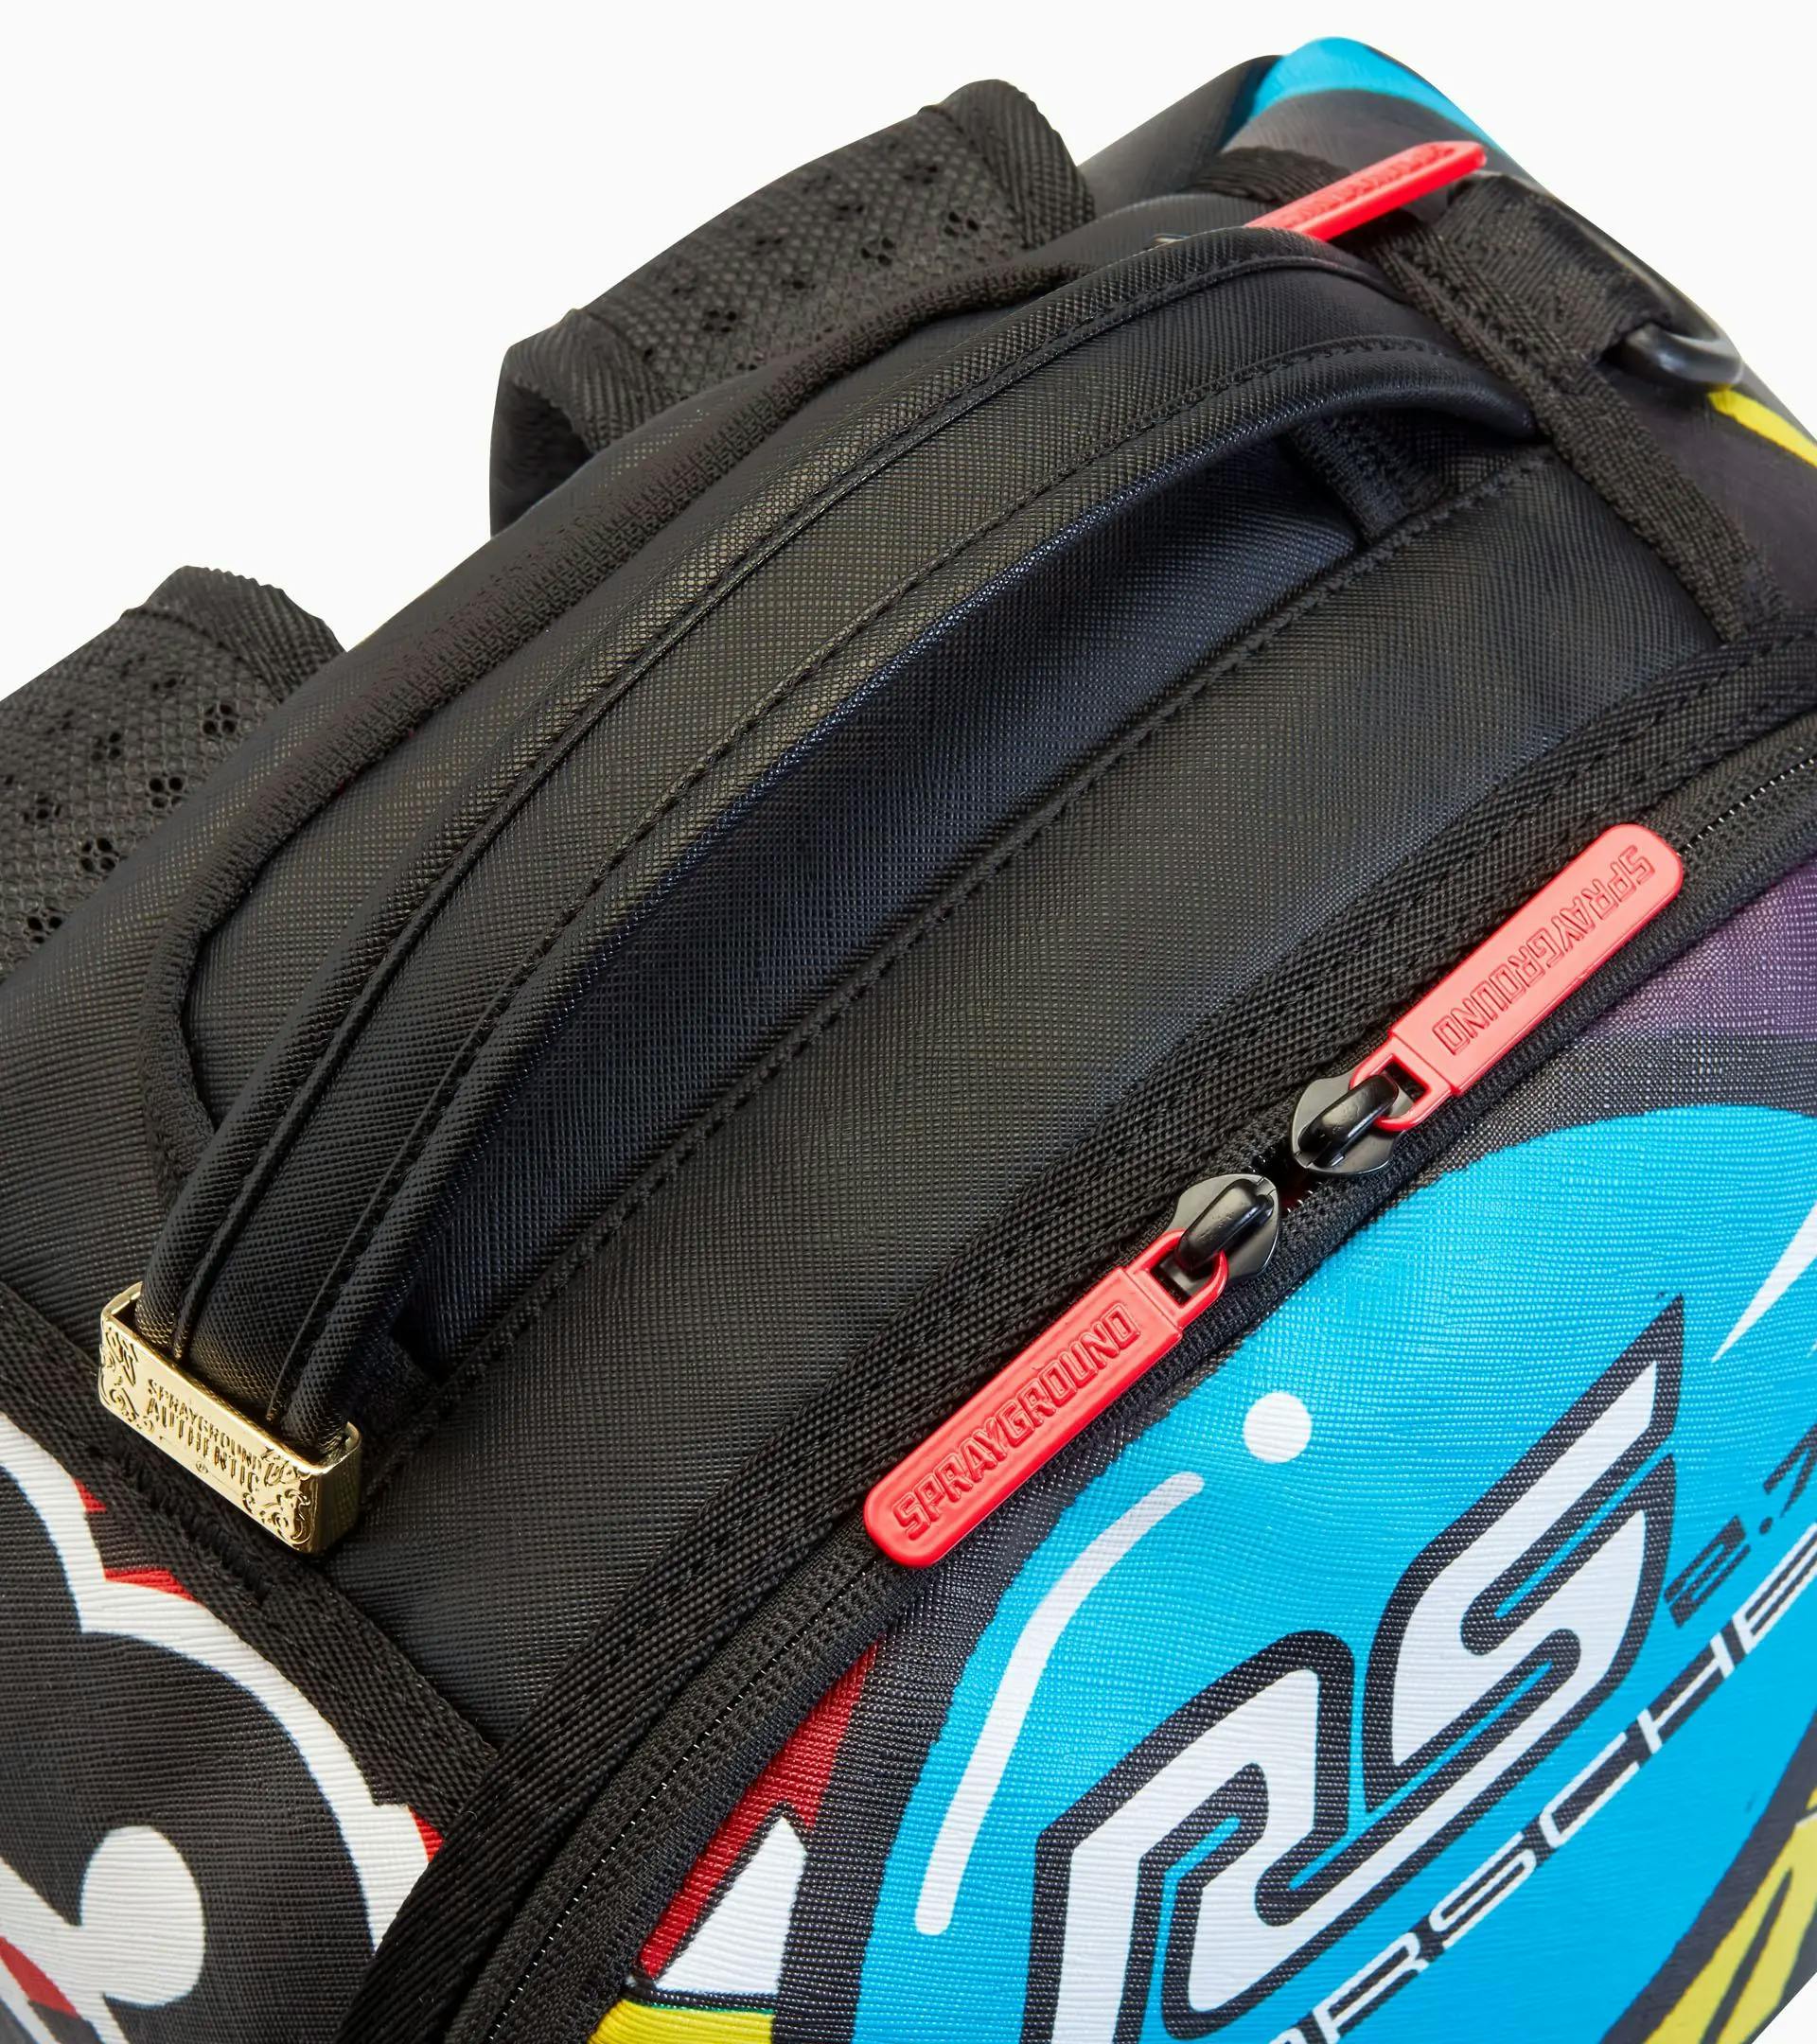 Sprayground Shipping The Goods Backpack